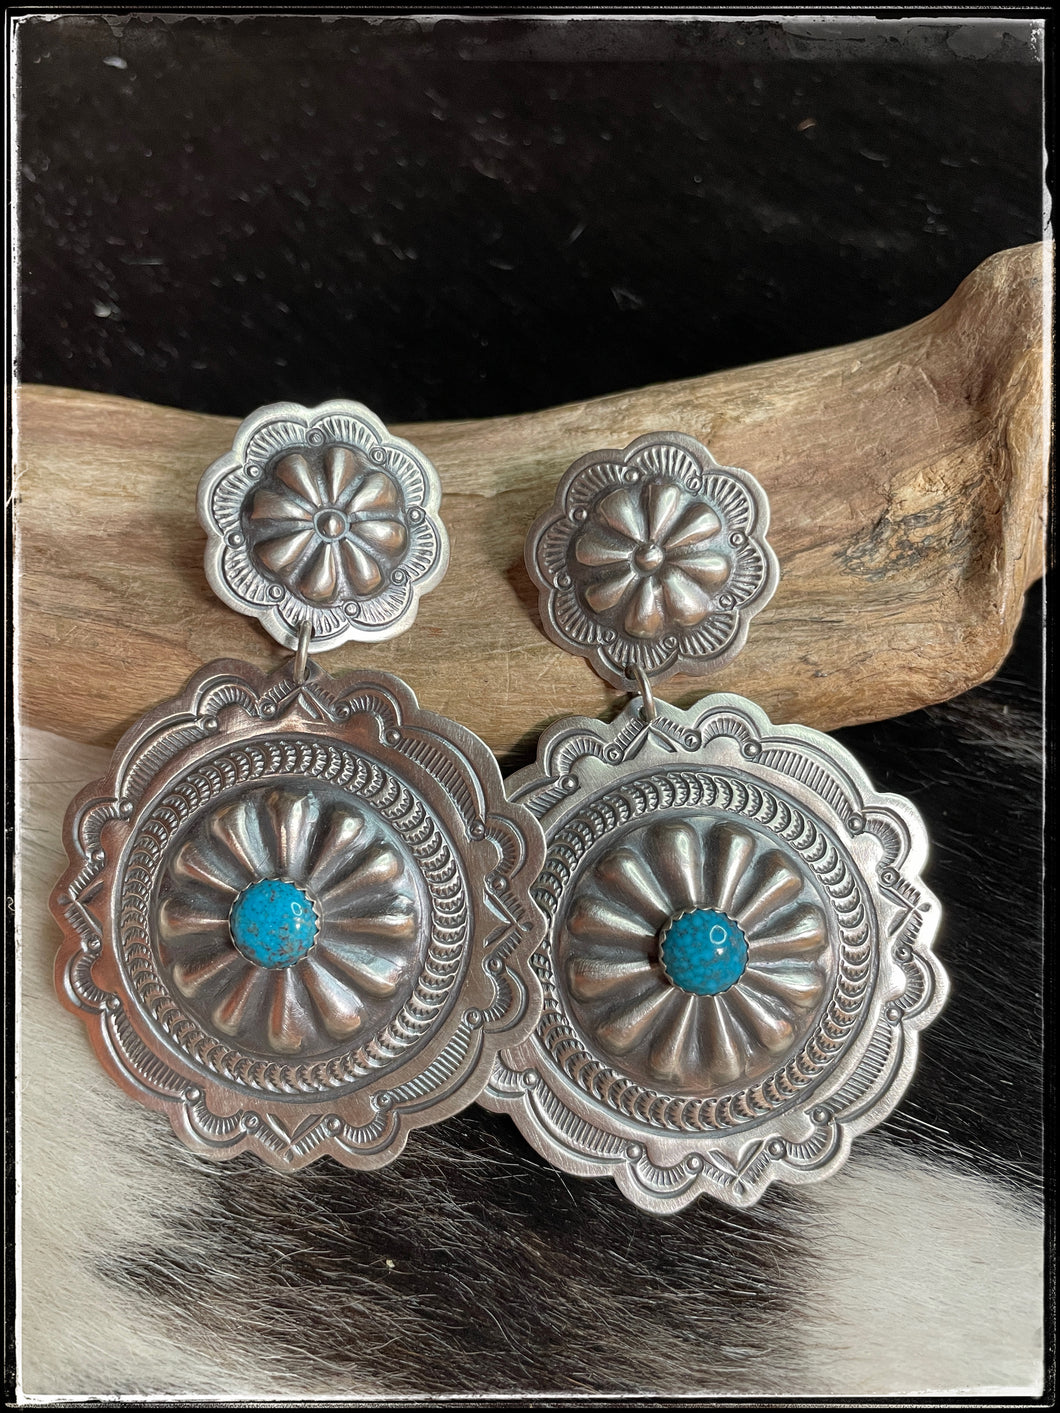 Arnold Blackgoat sterling silver concho earrings with turquoise